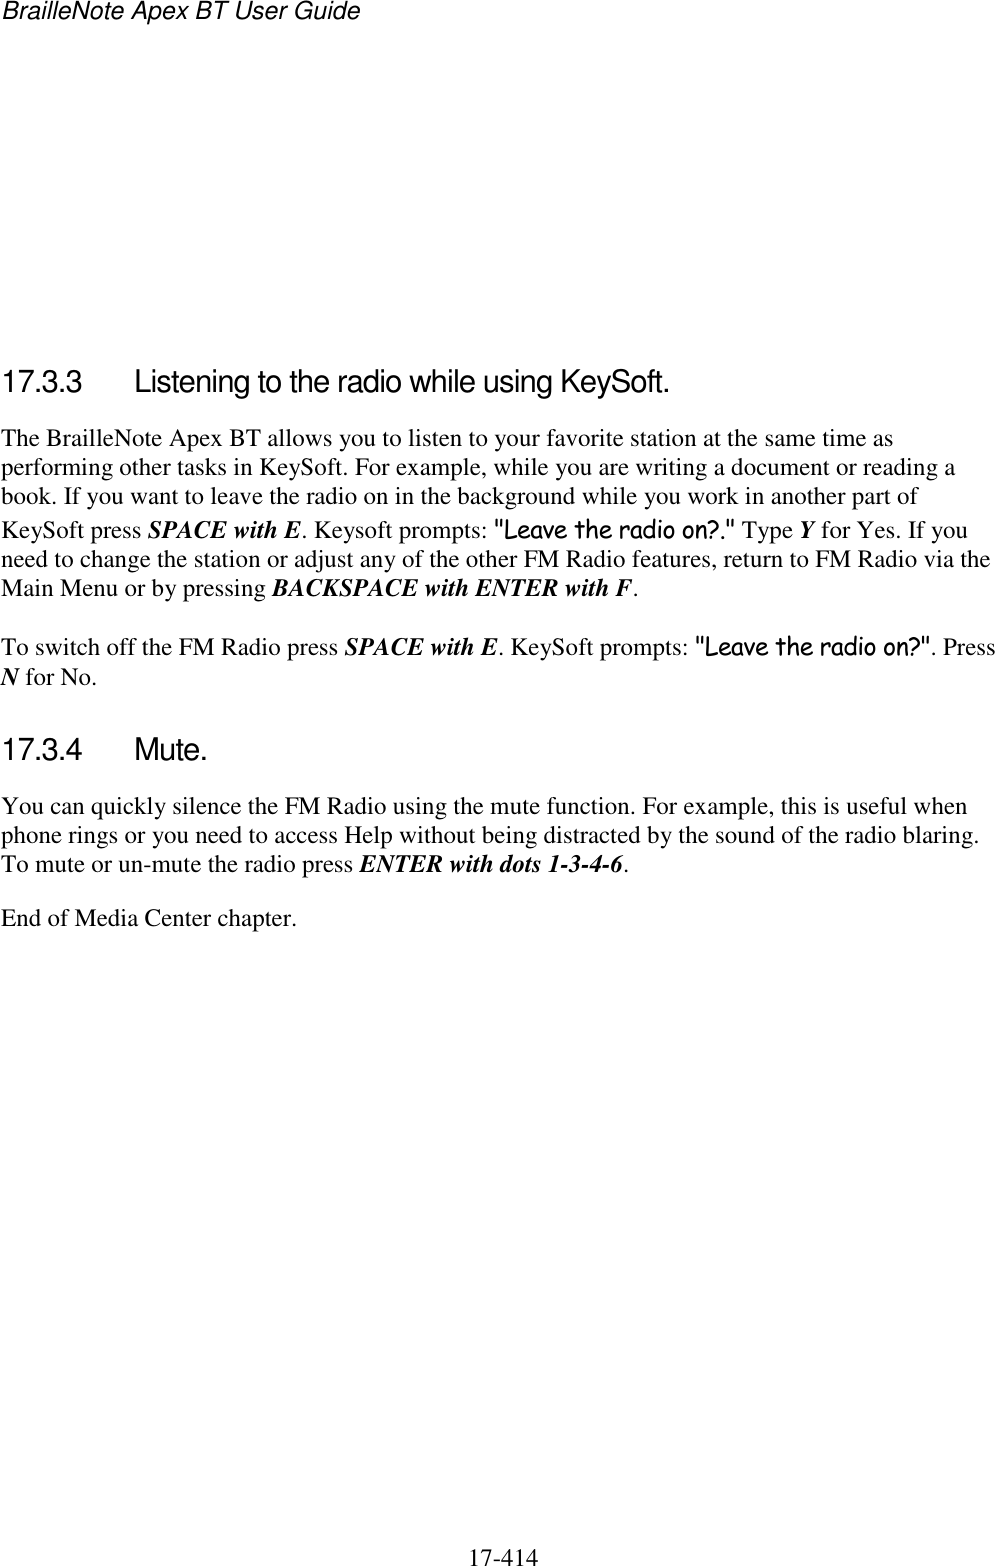 BrailleNote Apex BT User Guide   17-414         17.3.3  Listening to the radio while using KeySoft. The BrailleNote Apex BT allows you to listen to your favorite station at the same time as performing other tasks in KeySoft. For example, while you are writing a document or reading a book. If you want to leave the radio on in the background while you work in another part of KeySoft press SPACE with E. Keysoft prompts: &quot;Leave the radio on?.&quot; Type Y for Yes. If you need to change the station or adjust any of the other FM Radio features, return to FM Radio via the Main Menu or by pressing BACKSPACE with ENTER with F. To switch off the FM Radio press SPACE with E. KeySoft prompts: &quot;Leave the radio on?&quot;. Press N for No.   17.3.4  Mute. You can quickly silence the FM Radio using the mute function. For example, this is useful when phone rings or you need to access Help without being distracted by the sound of the radio blaring. To mute or un-mute the radio press ENTER with dots 1-3-4-6. End of Media Center chapter.  